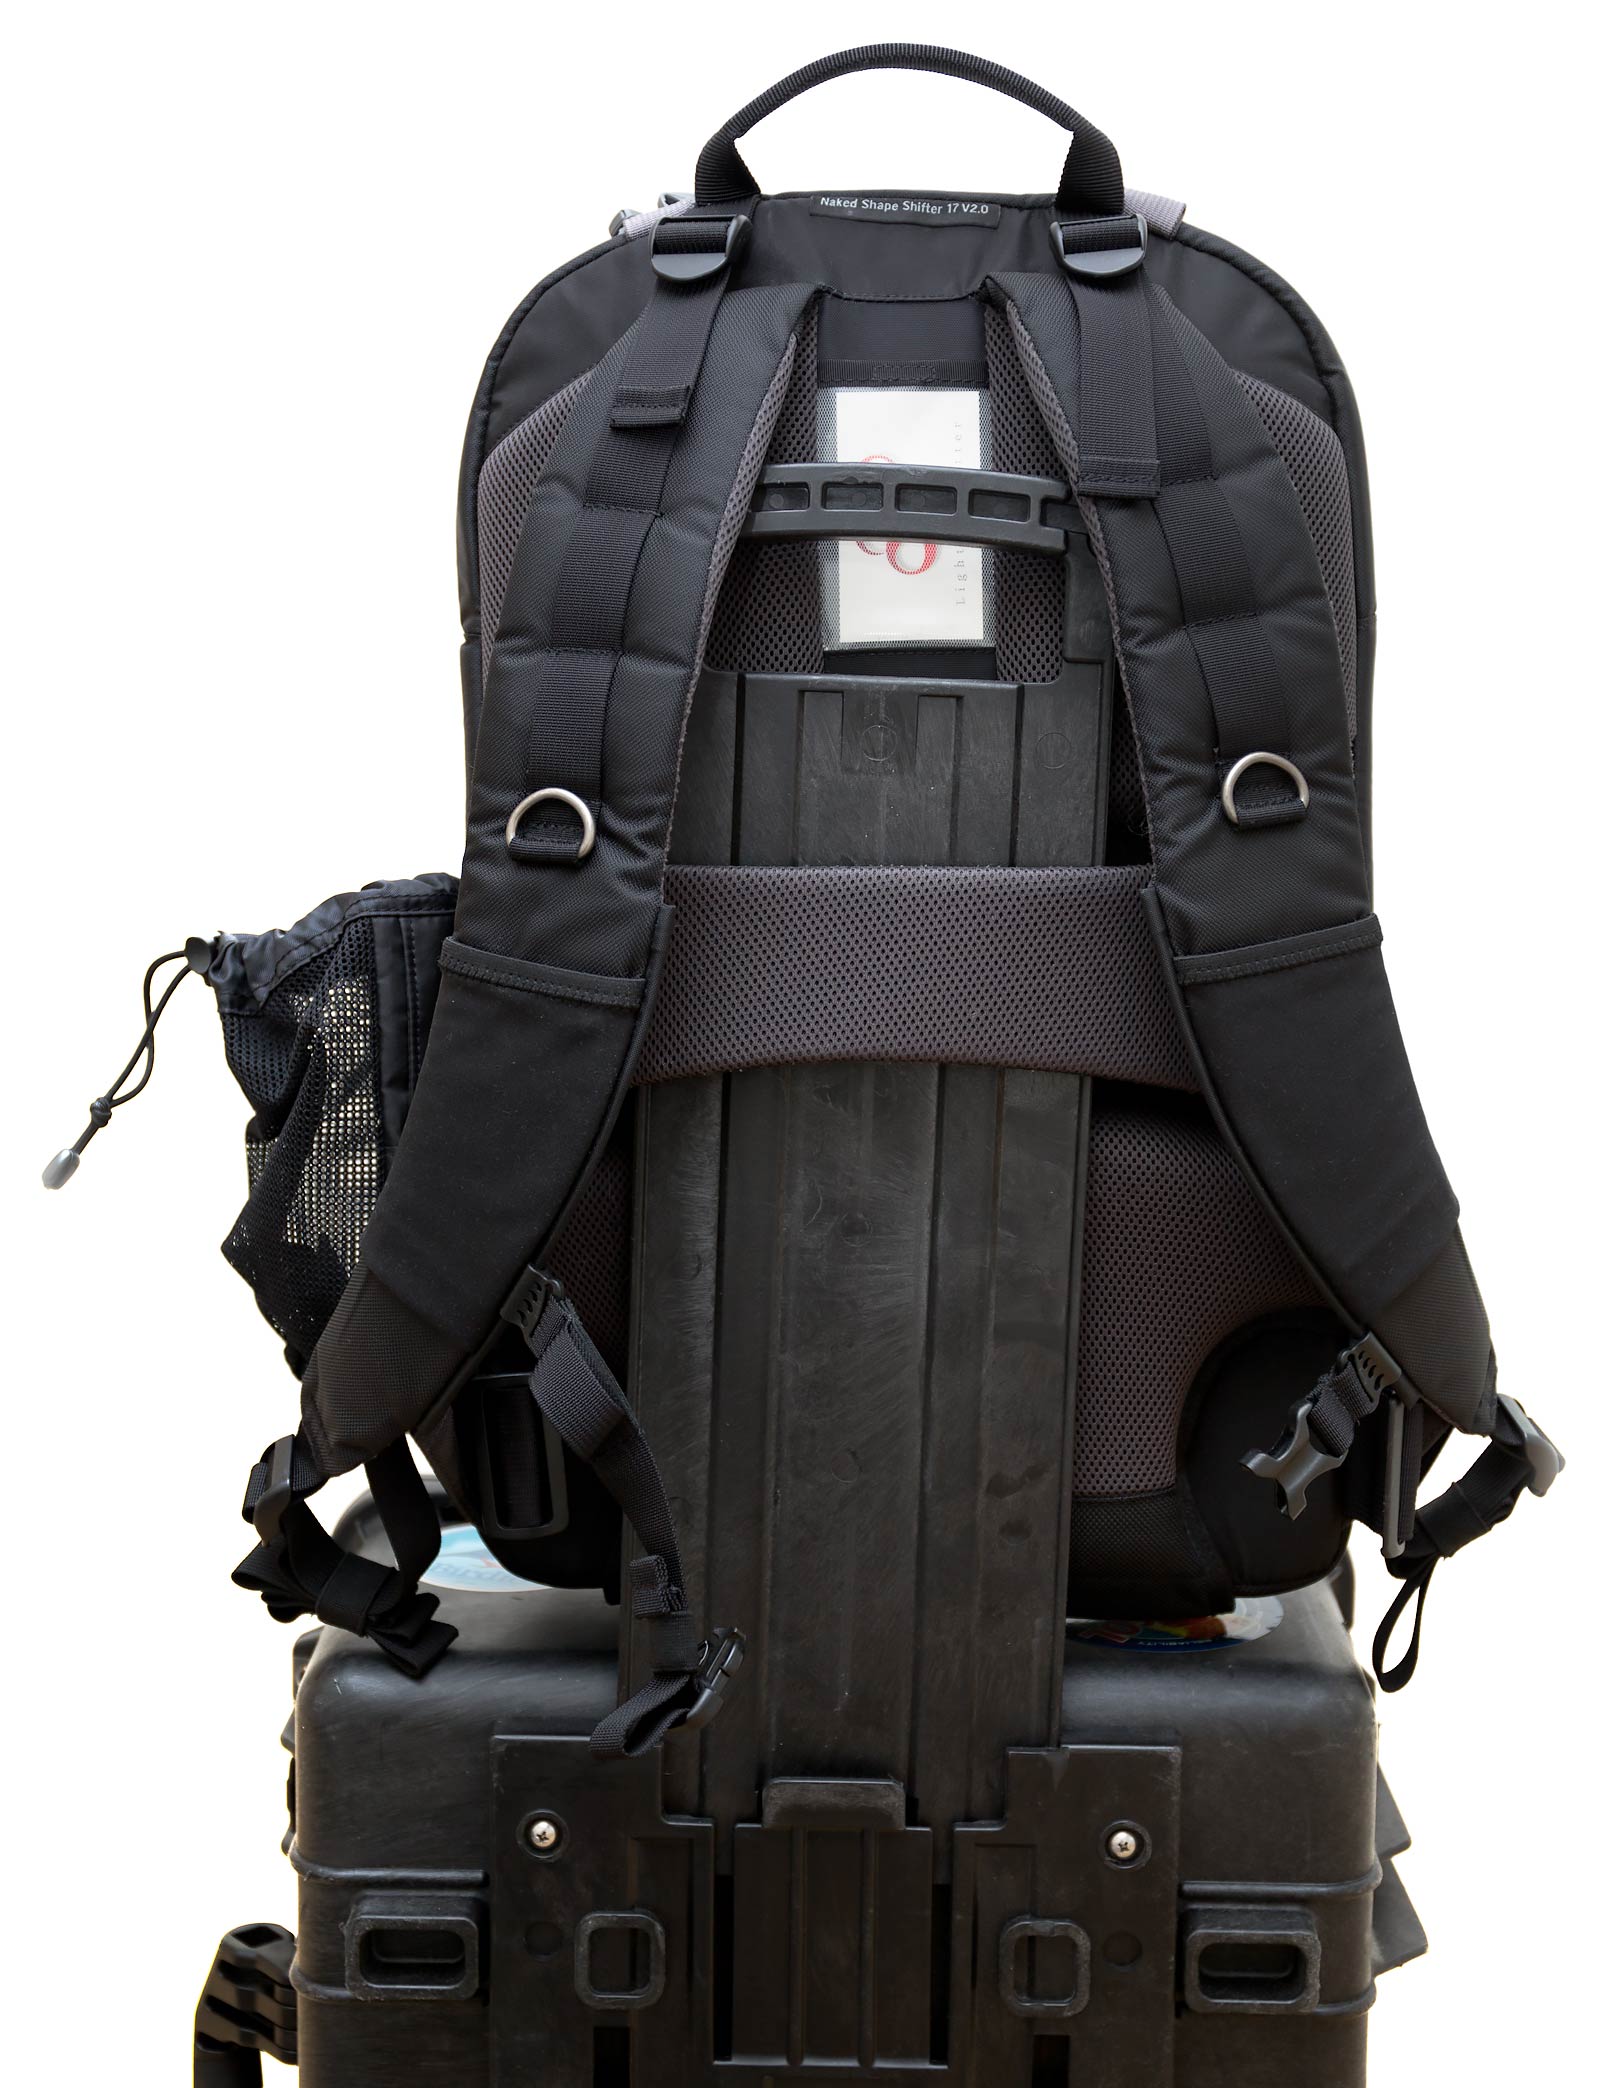 Review: ThinkTank Naked Shape Shifter 17 v2.0 Backpack - Light And